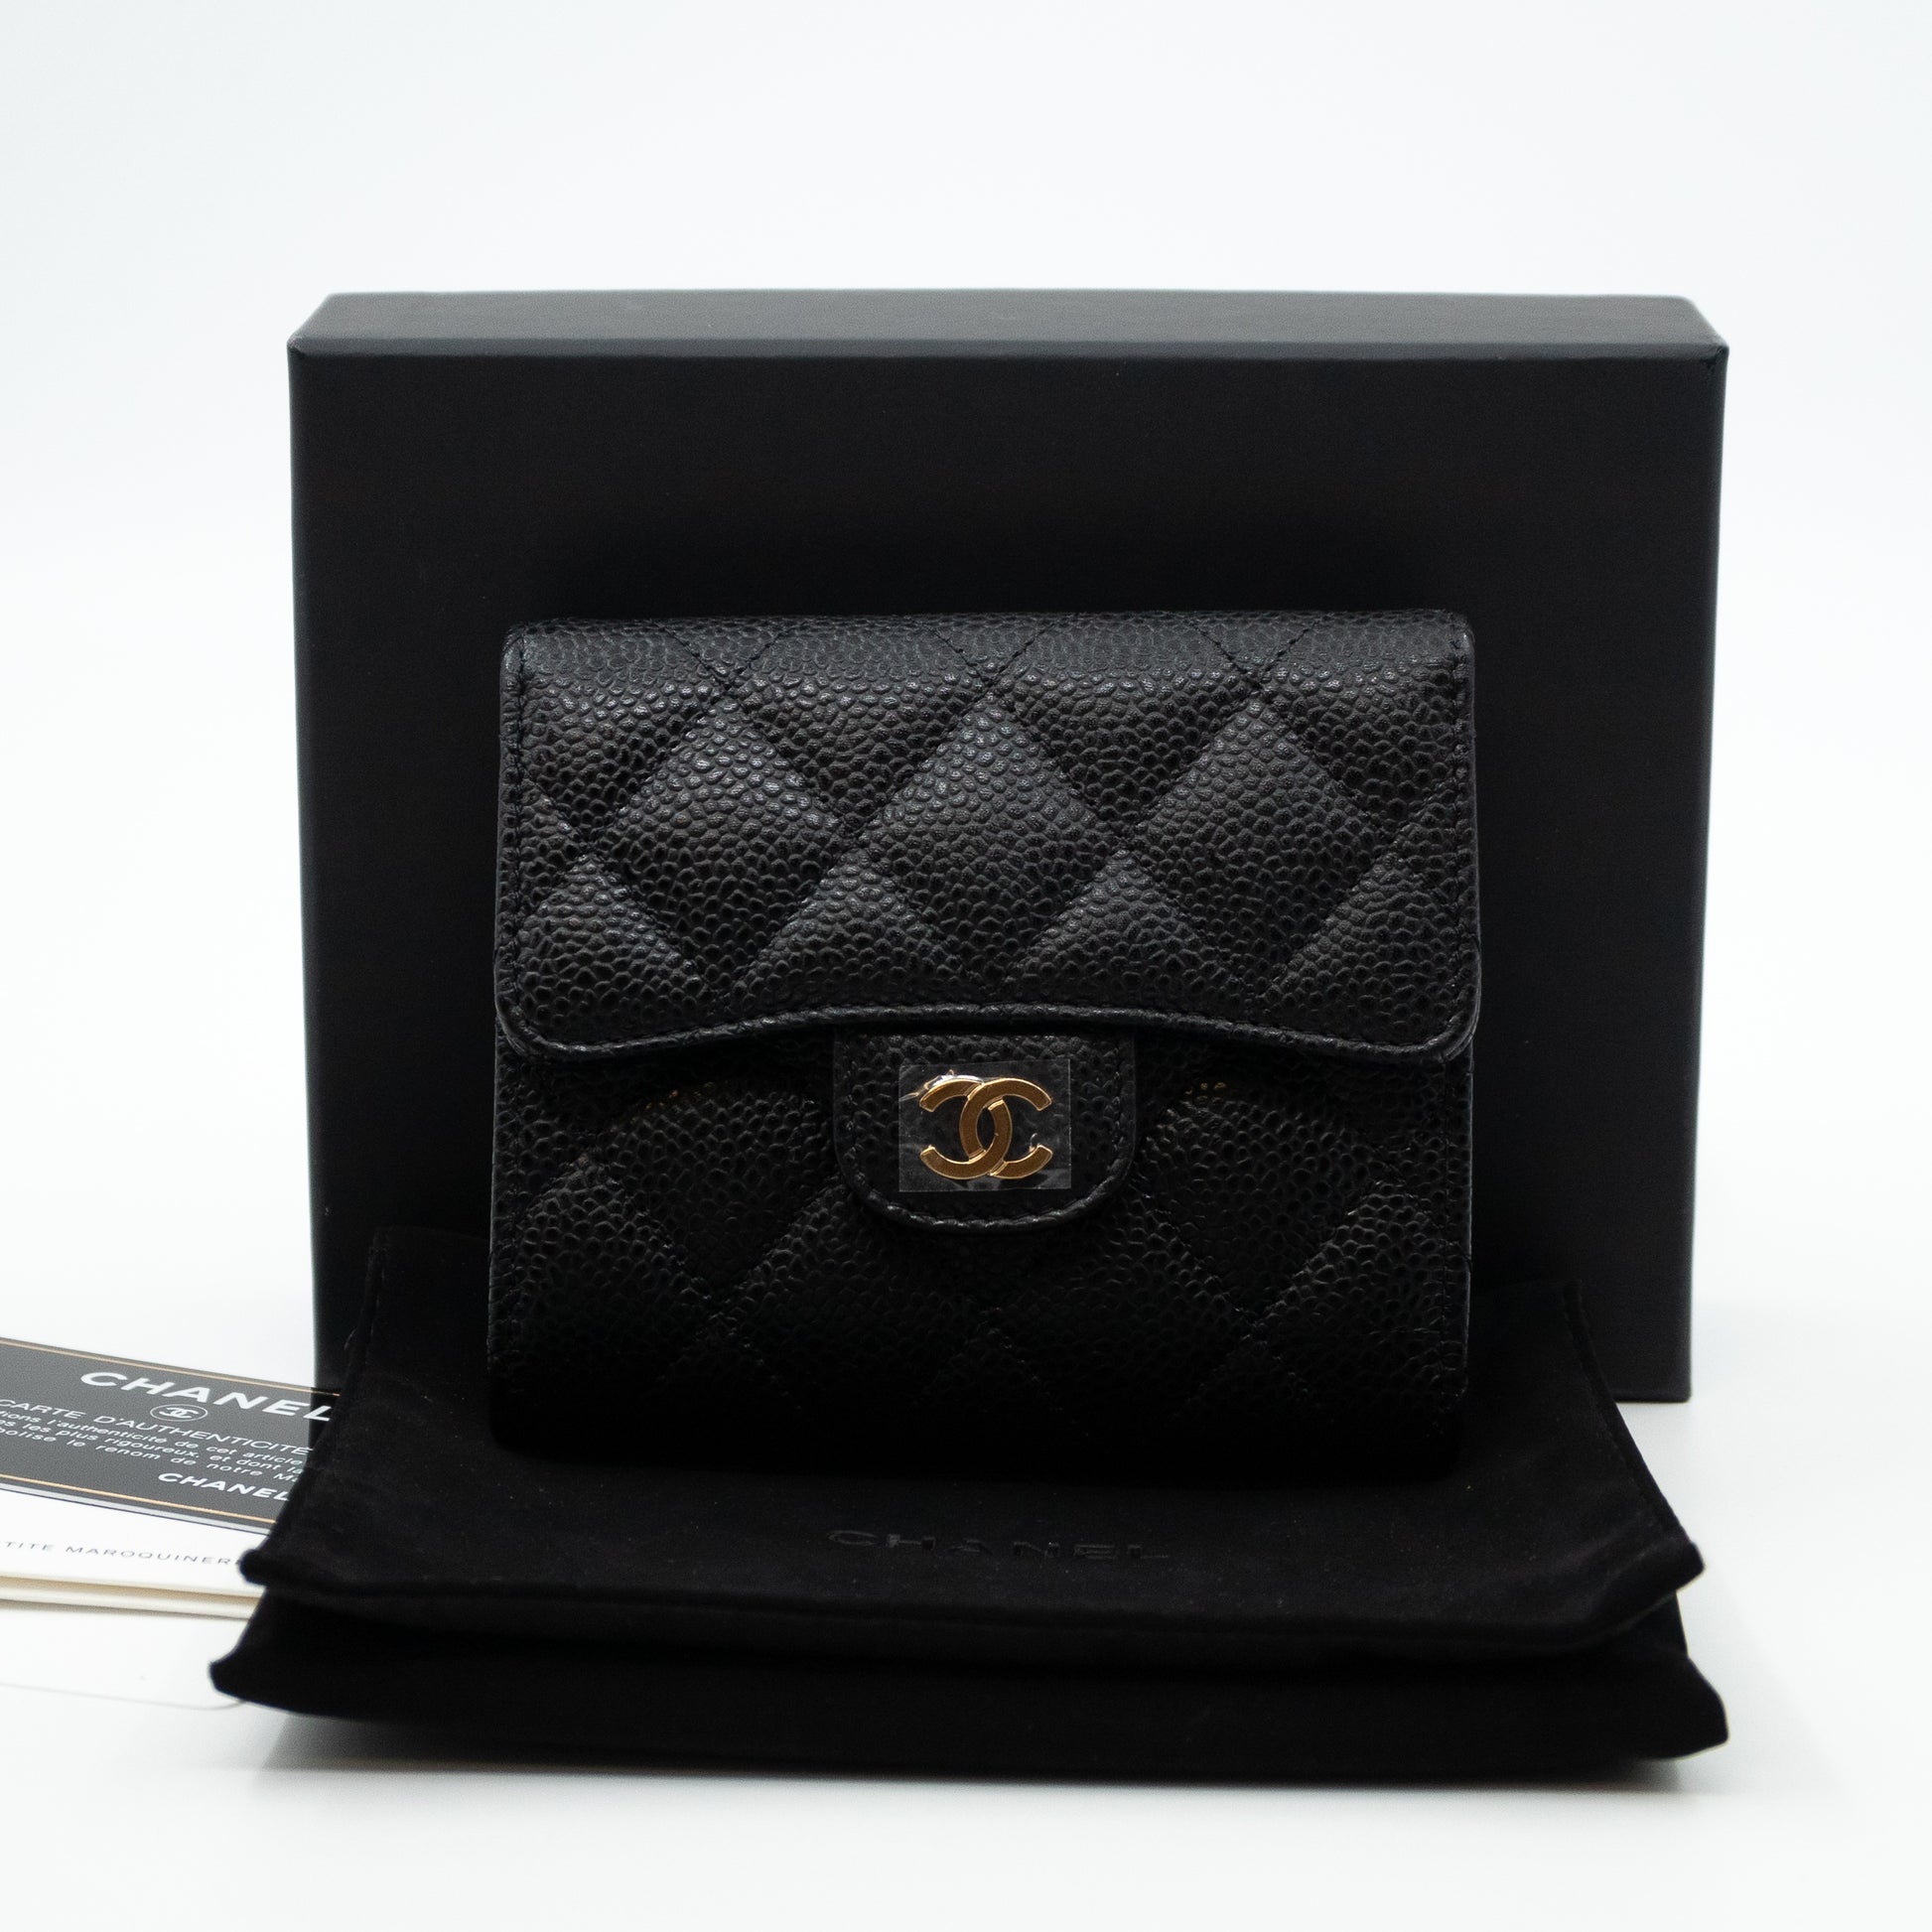 Chanel Classic Flap Small Wallet Black Caviar Gold Hardware